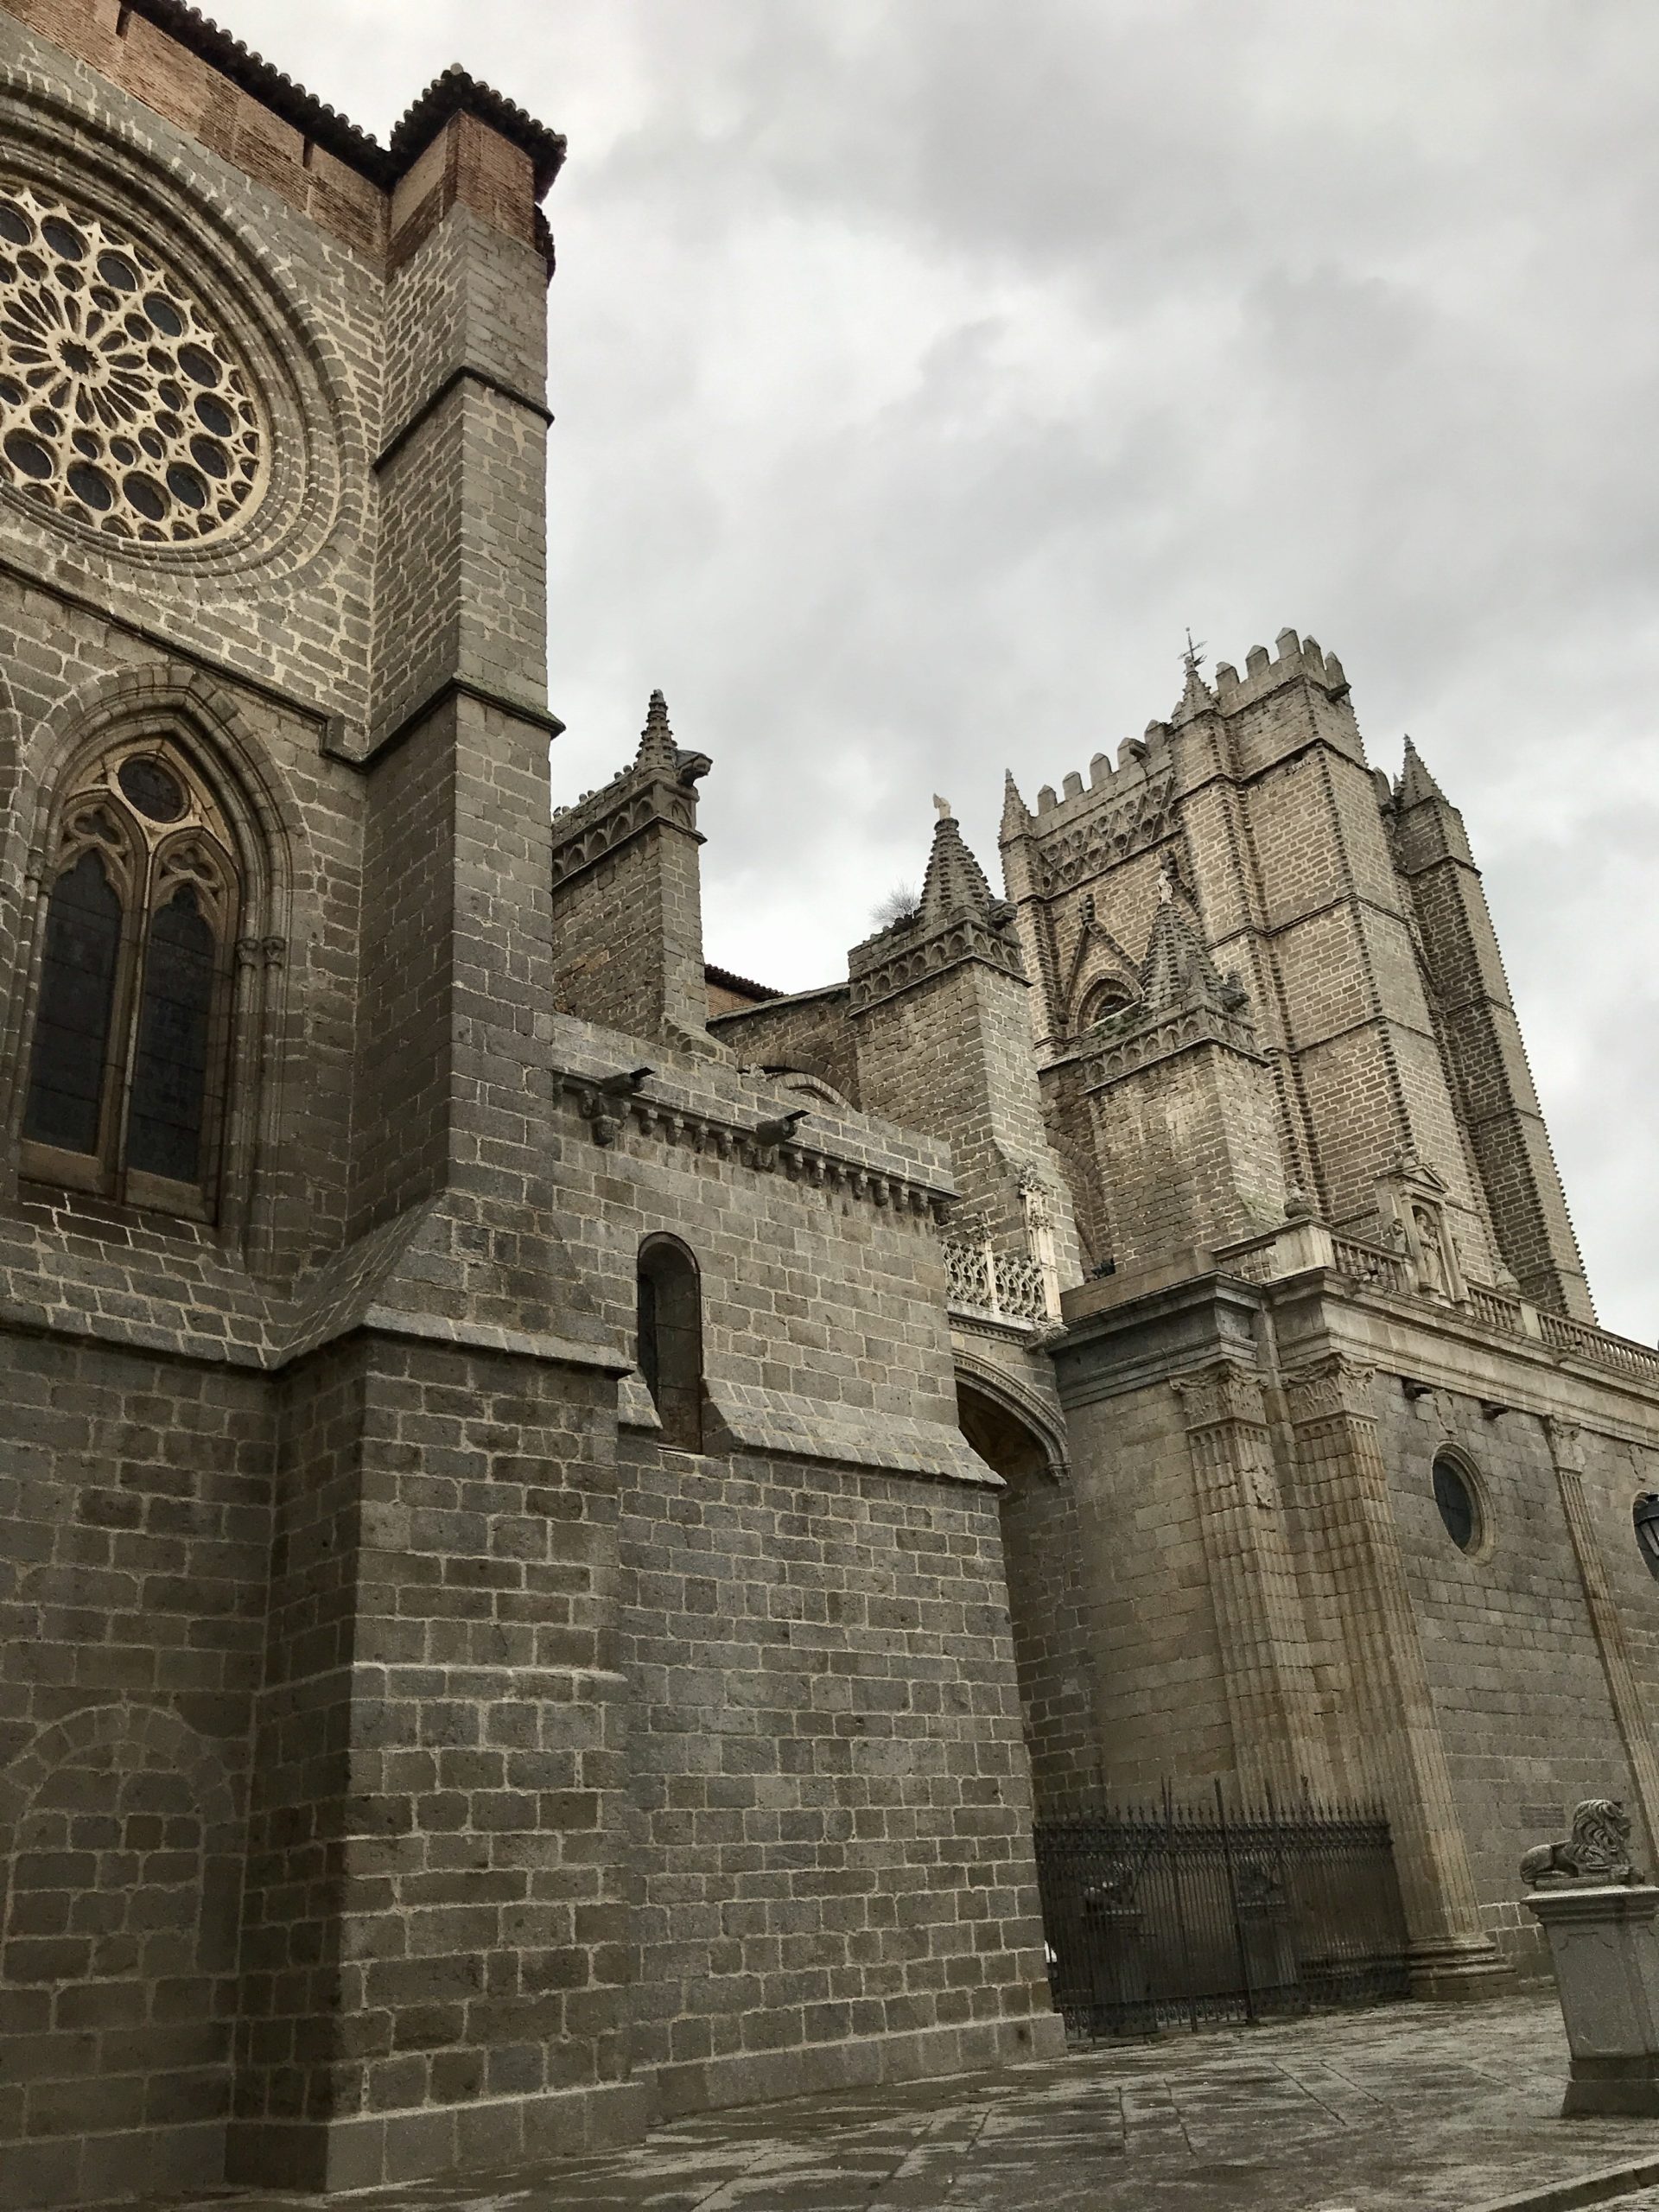 The Cathedral of Ávila